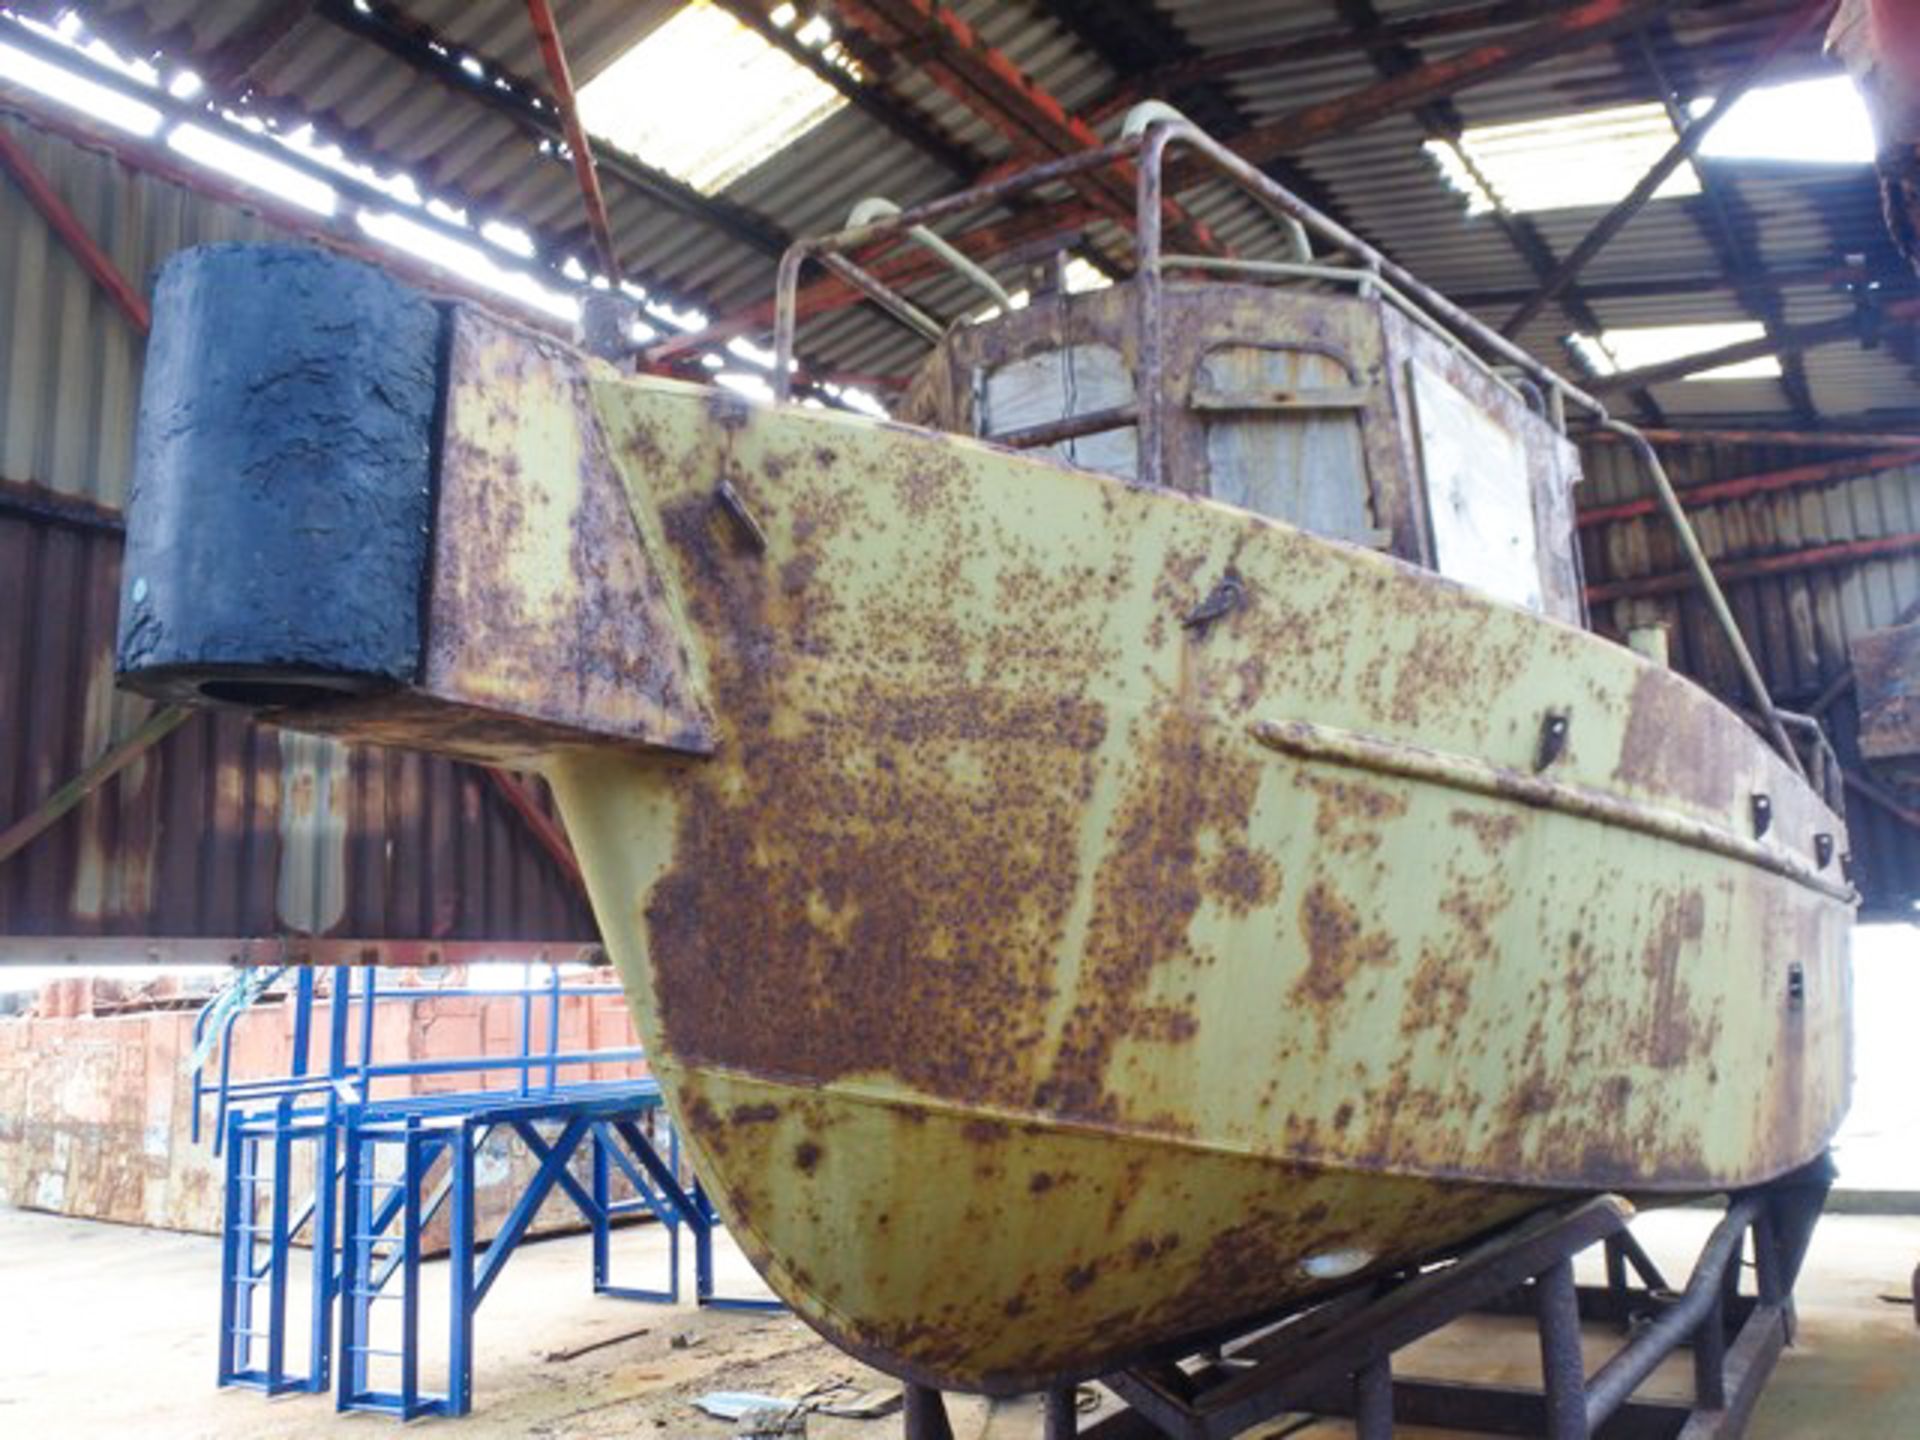 STEEL WORK BOAT, 4 CYL FORD ENGINE, L - 8.2M, W -2.8, H - 3.5M, NOT IN CERT (SOLD AS SEEN)** 10% BUY - Bild 2 aus 10